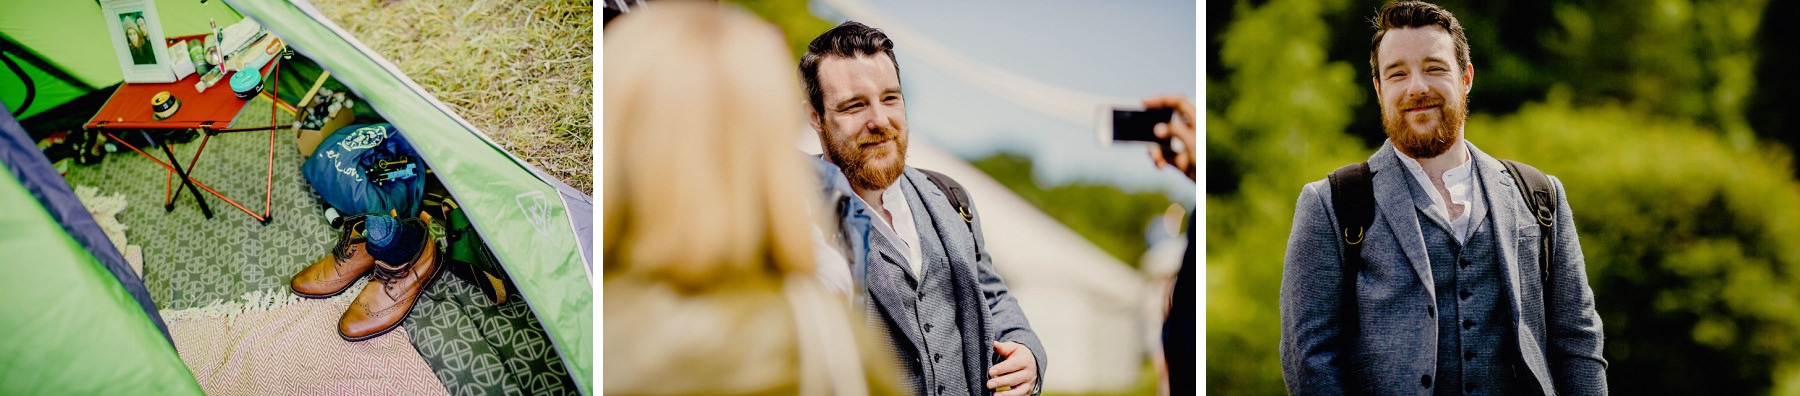 the groom at wilderness festival